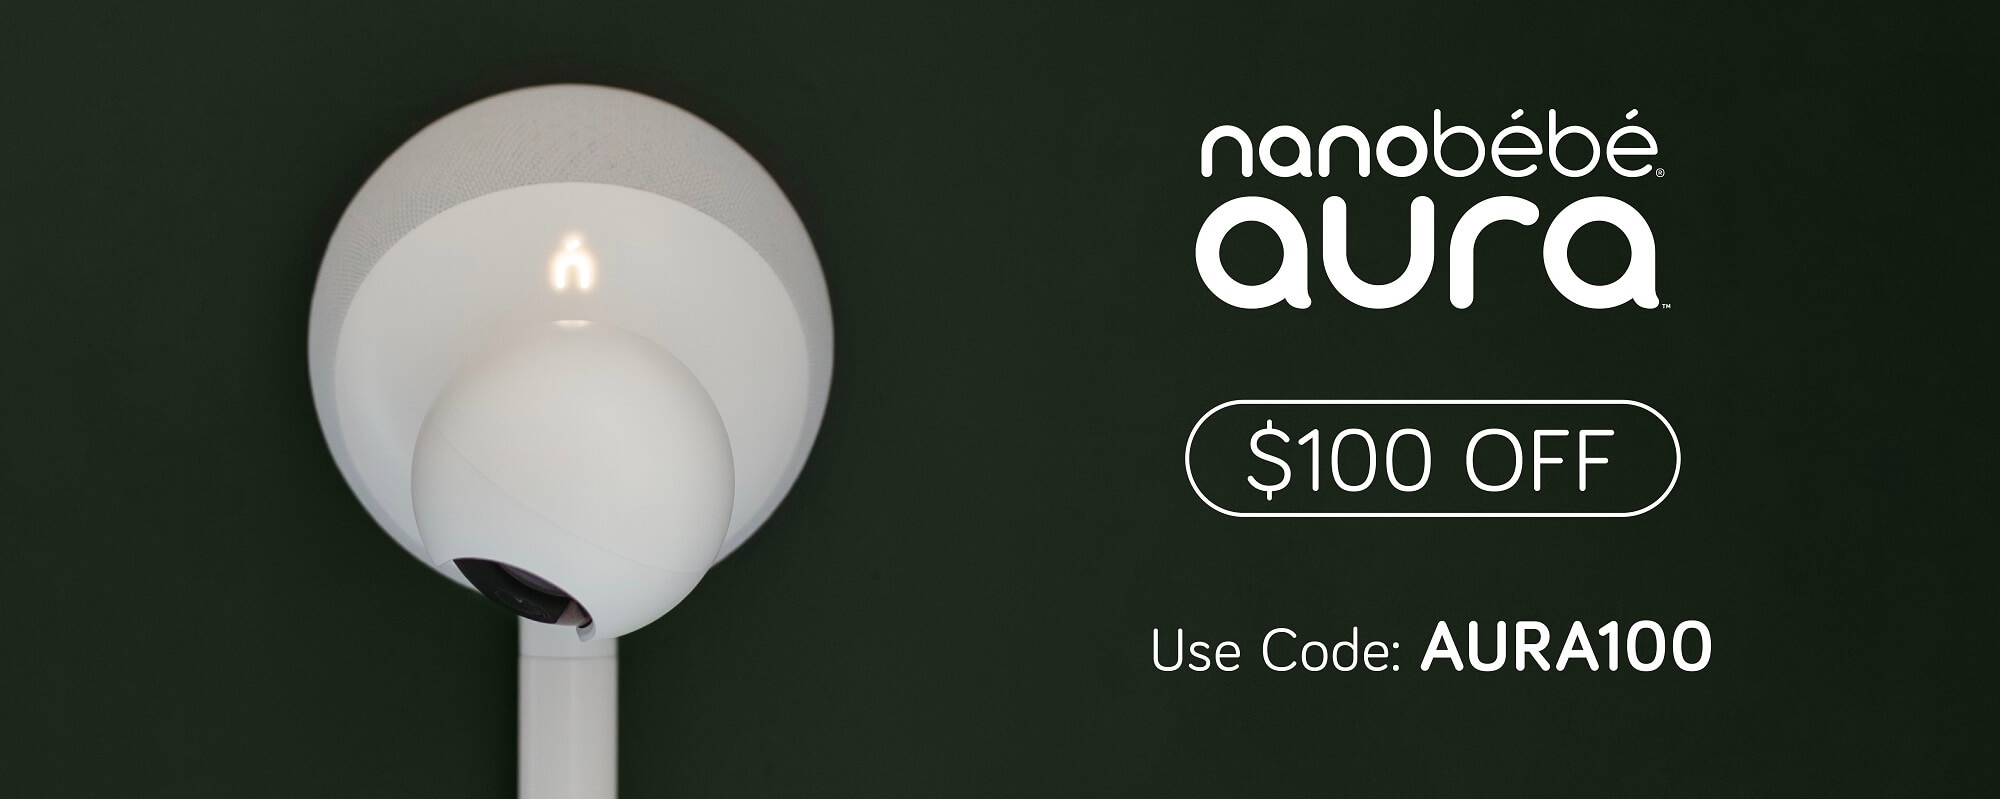 Take $100 off your purchase of a Nanobébé Aura Monitor! Use code AURA100 at checkout.